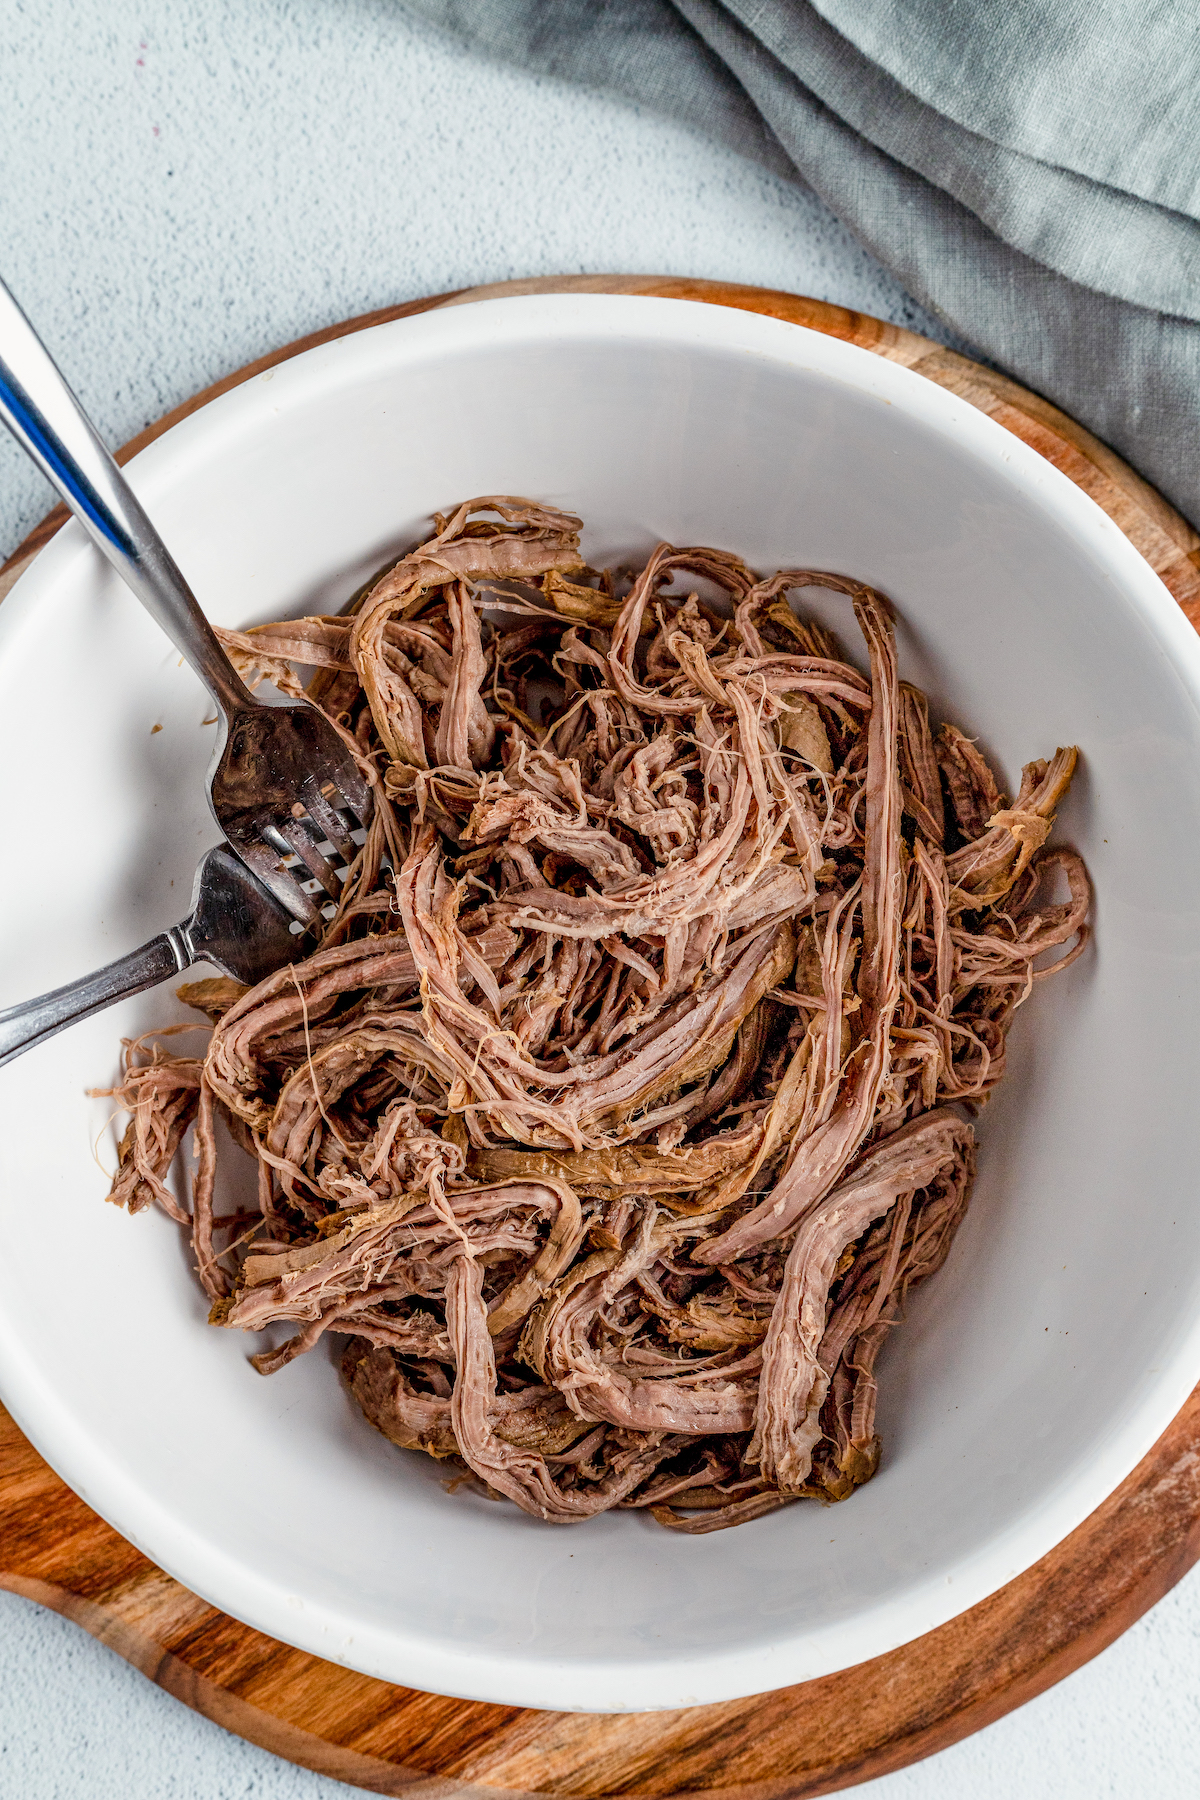 Shredded beef in a bowl with two forks.